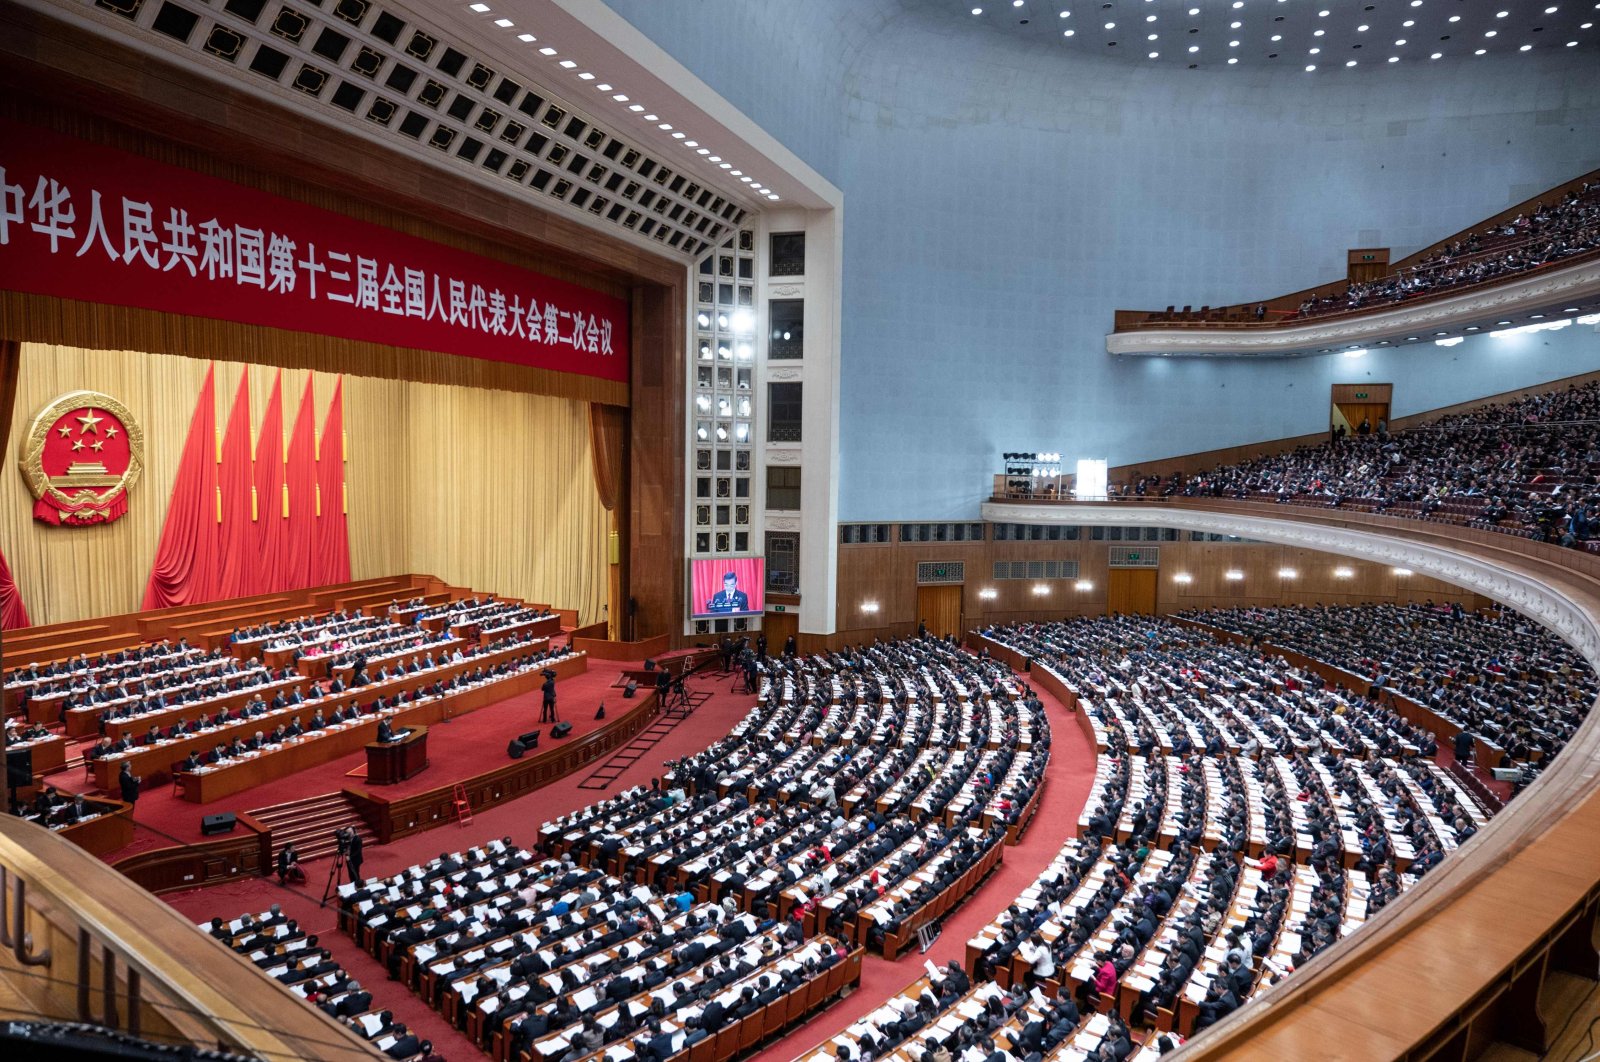 This file photo taken on March 12, 2019 shows a general view of a plenary session of the National People's Congress (NPC) at the Great Hall of the People in Beijing. (AFP Photo)